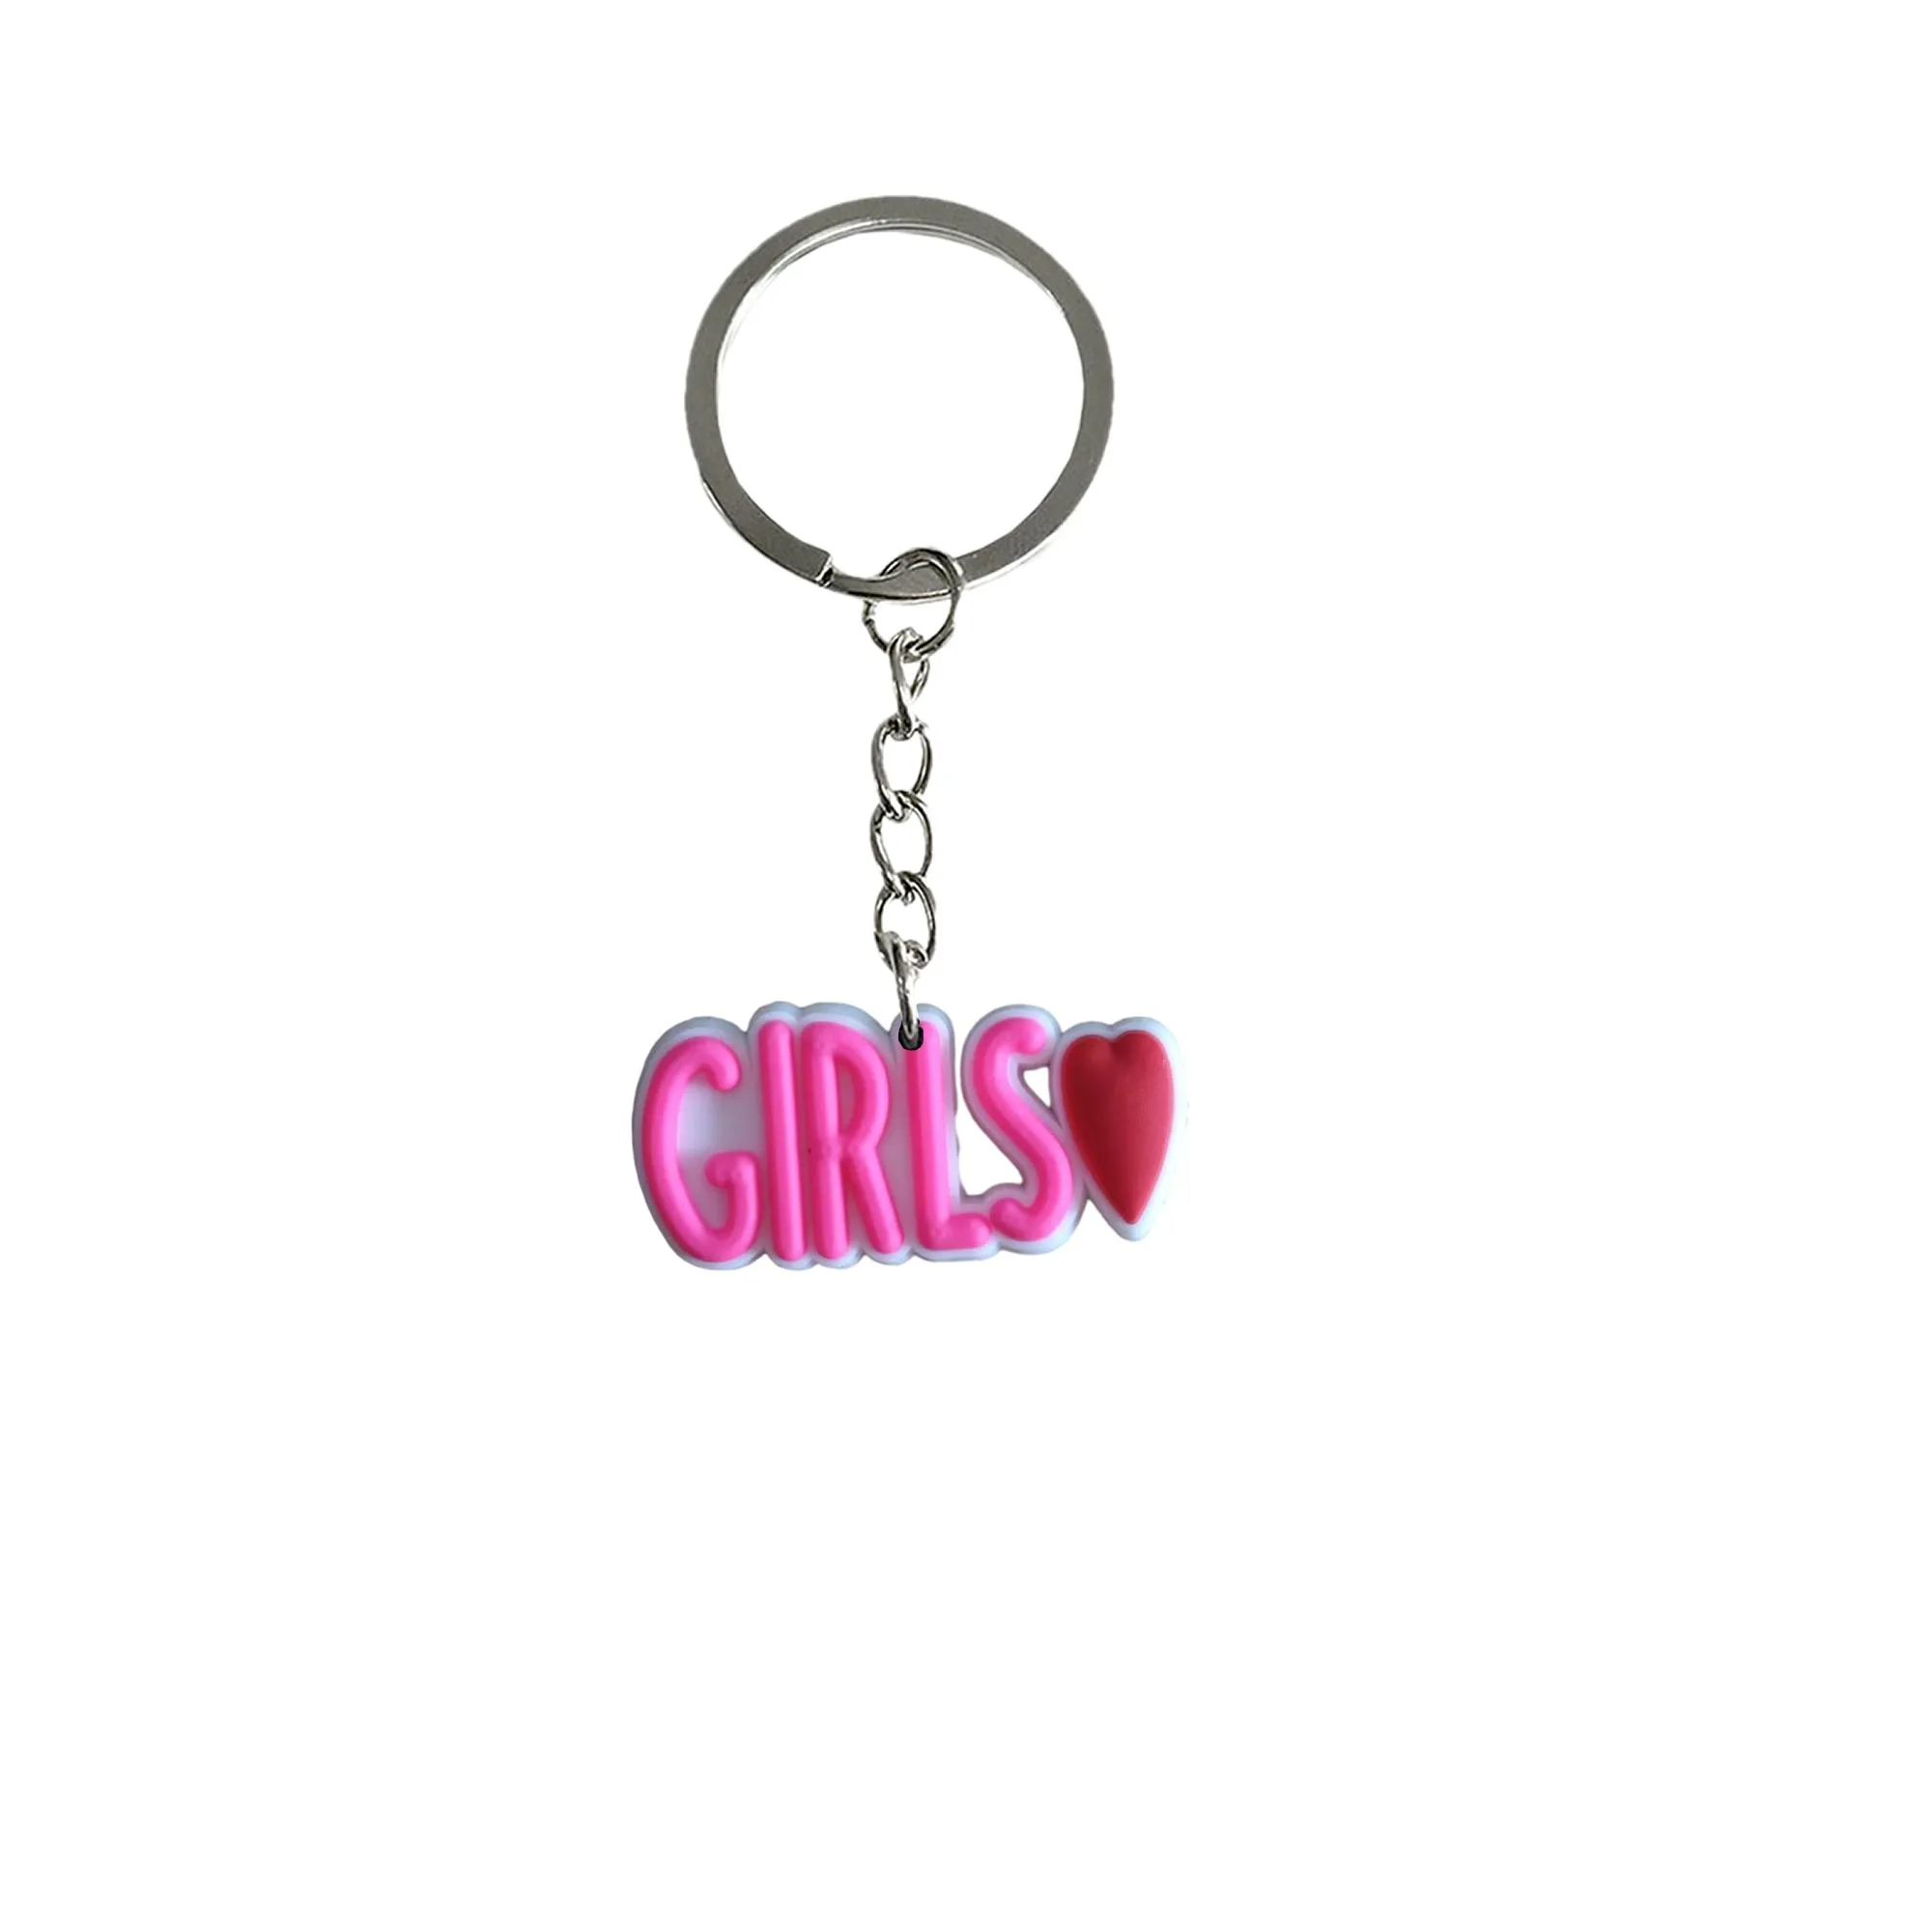 pink  2 keychain for kids party favors keyring backpacks key ring men suitable schoolbag keychains pendant accessories bags backpack